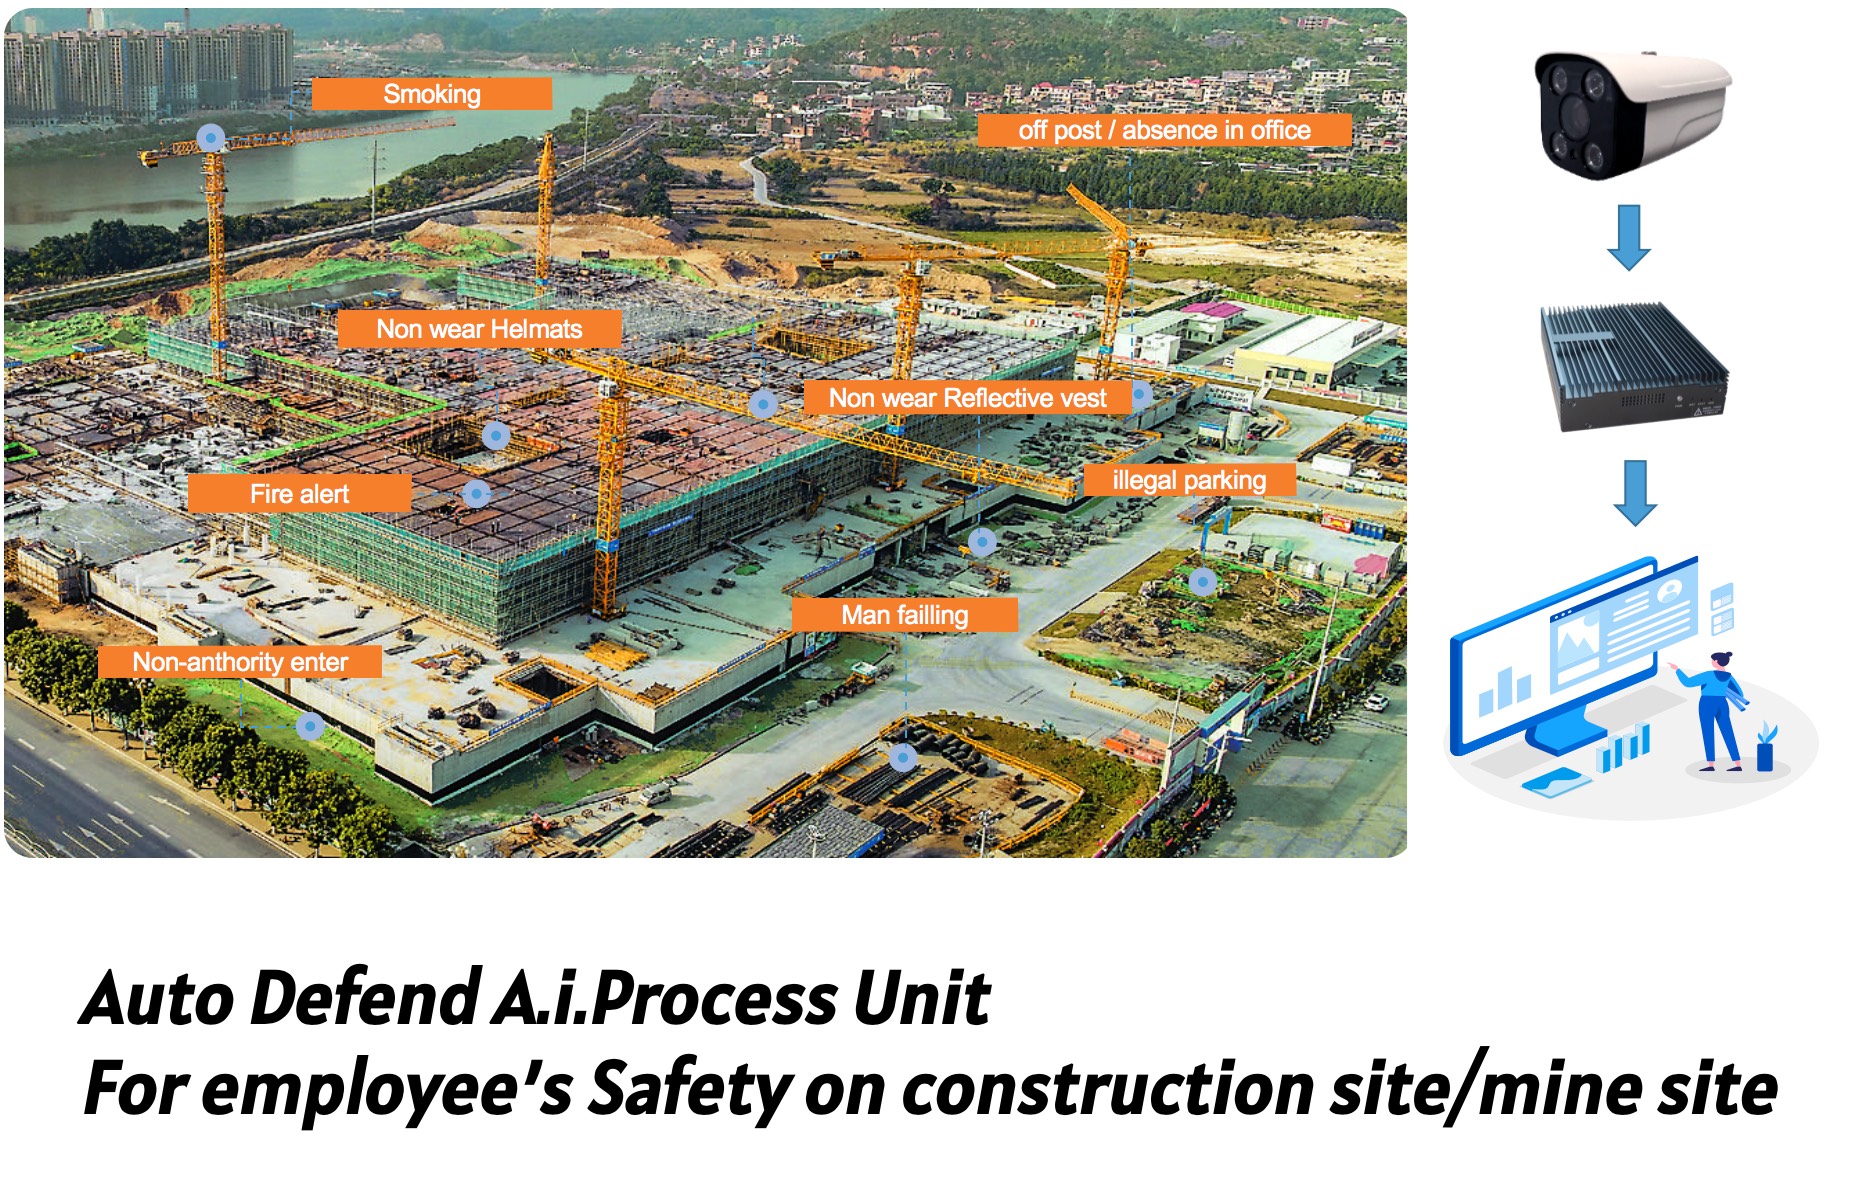 Auto Defend A.i.Process Unit For employee’s Safety on construction site/mine site